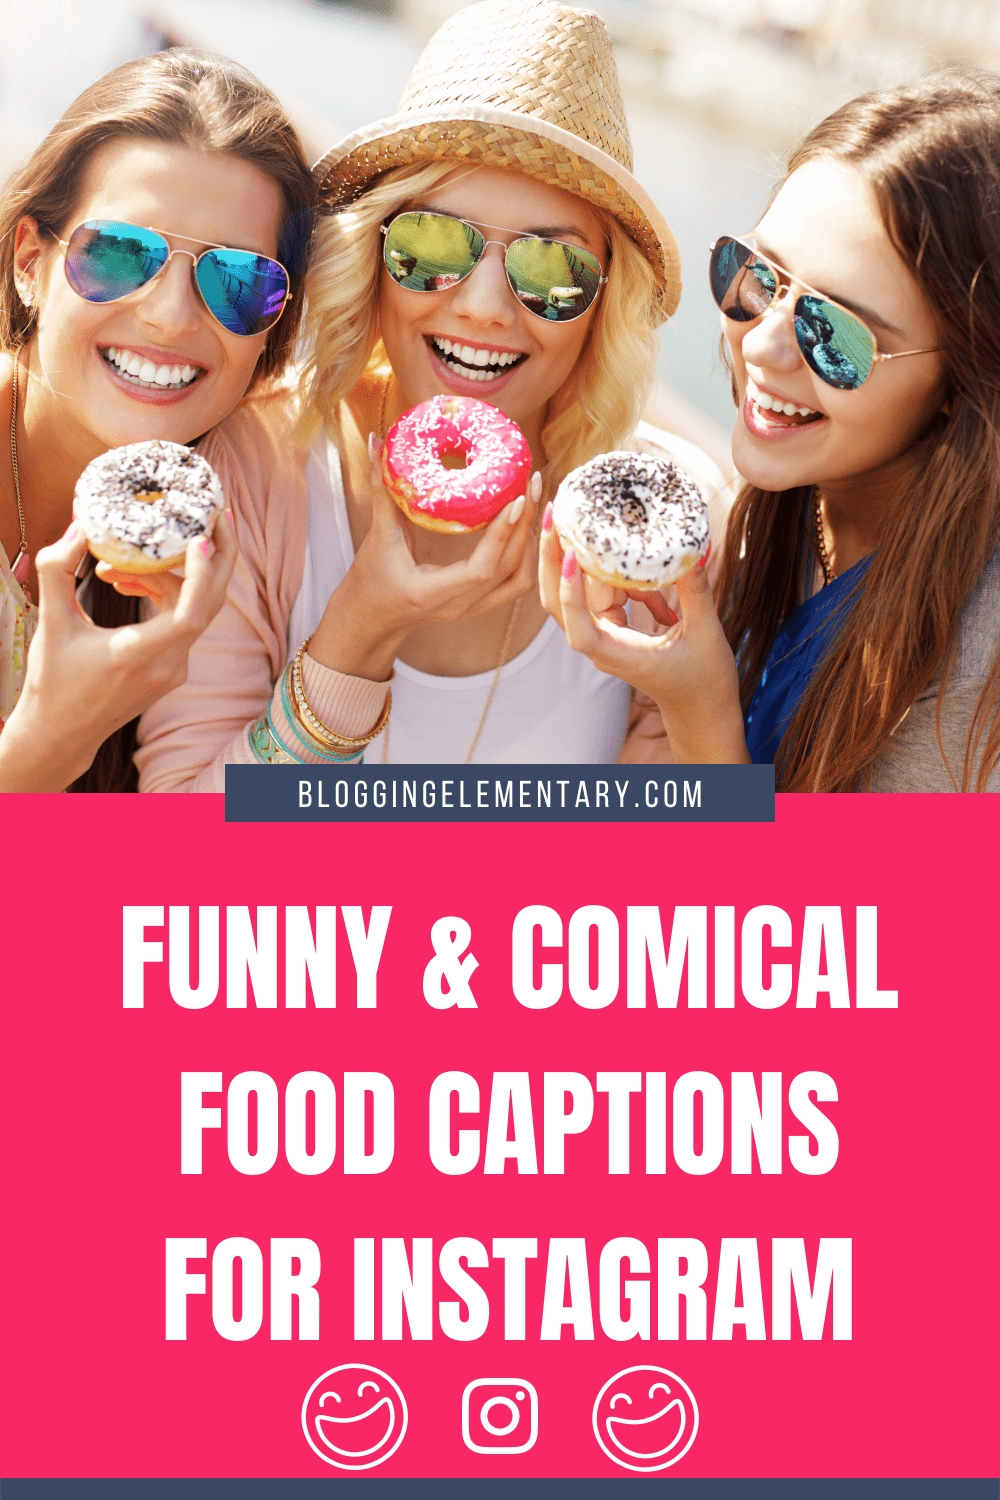 Funny food captions for Instagram